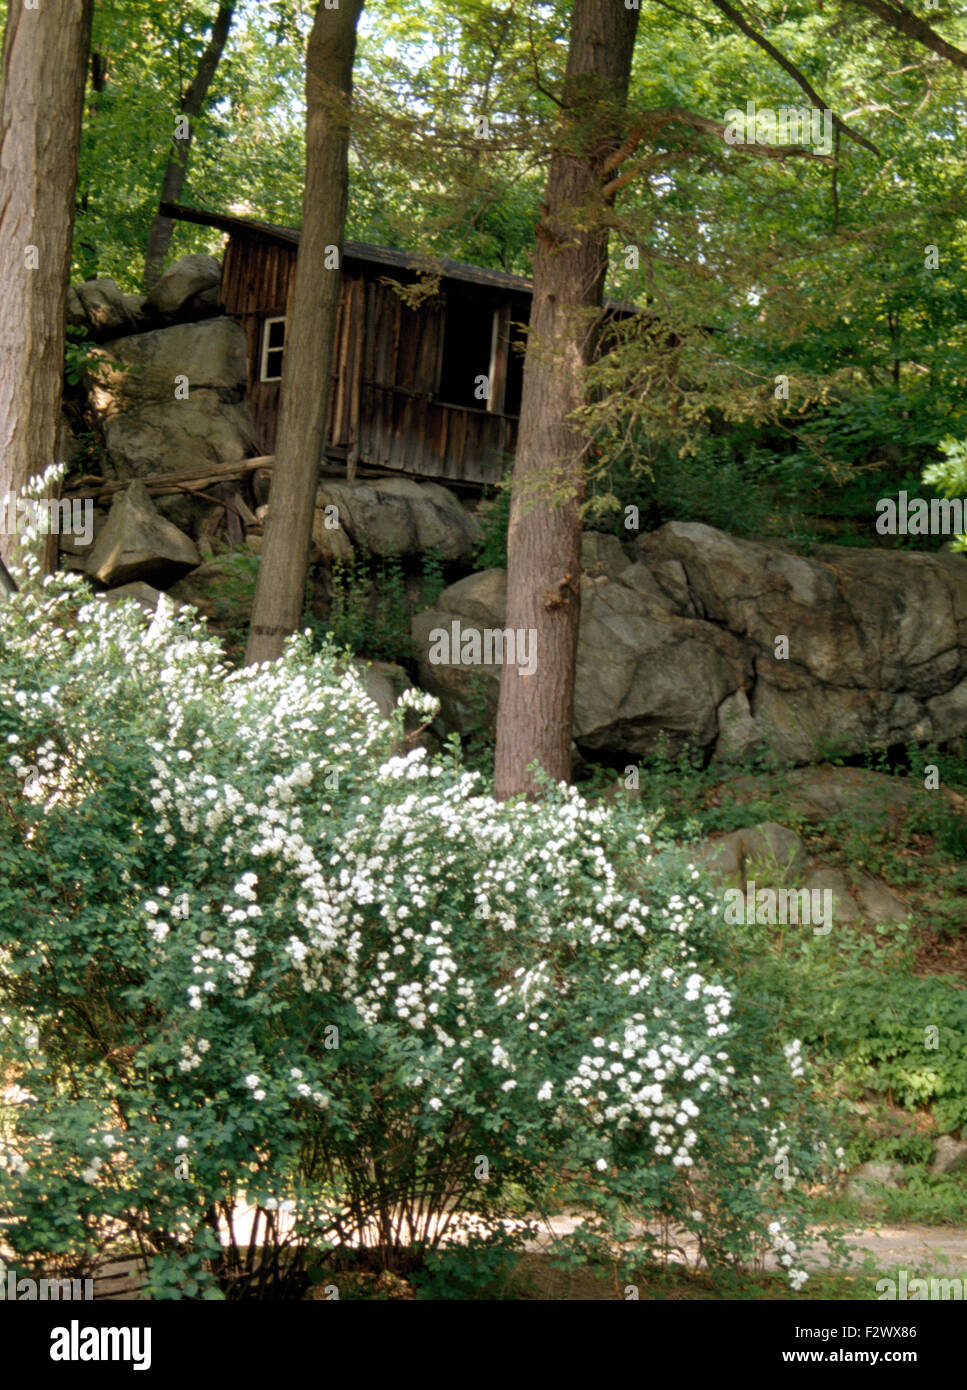 Wooden hut perched on large stone boulders on a wooded hillside on the East Coast of the United States Stock Photo